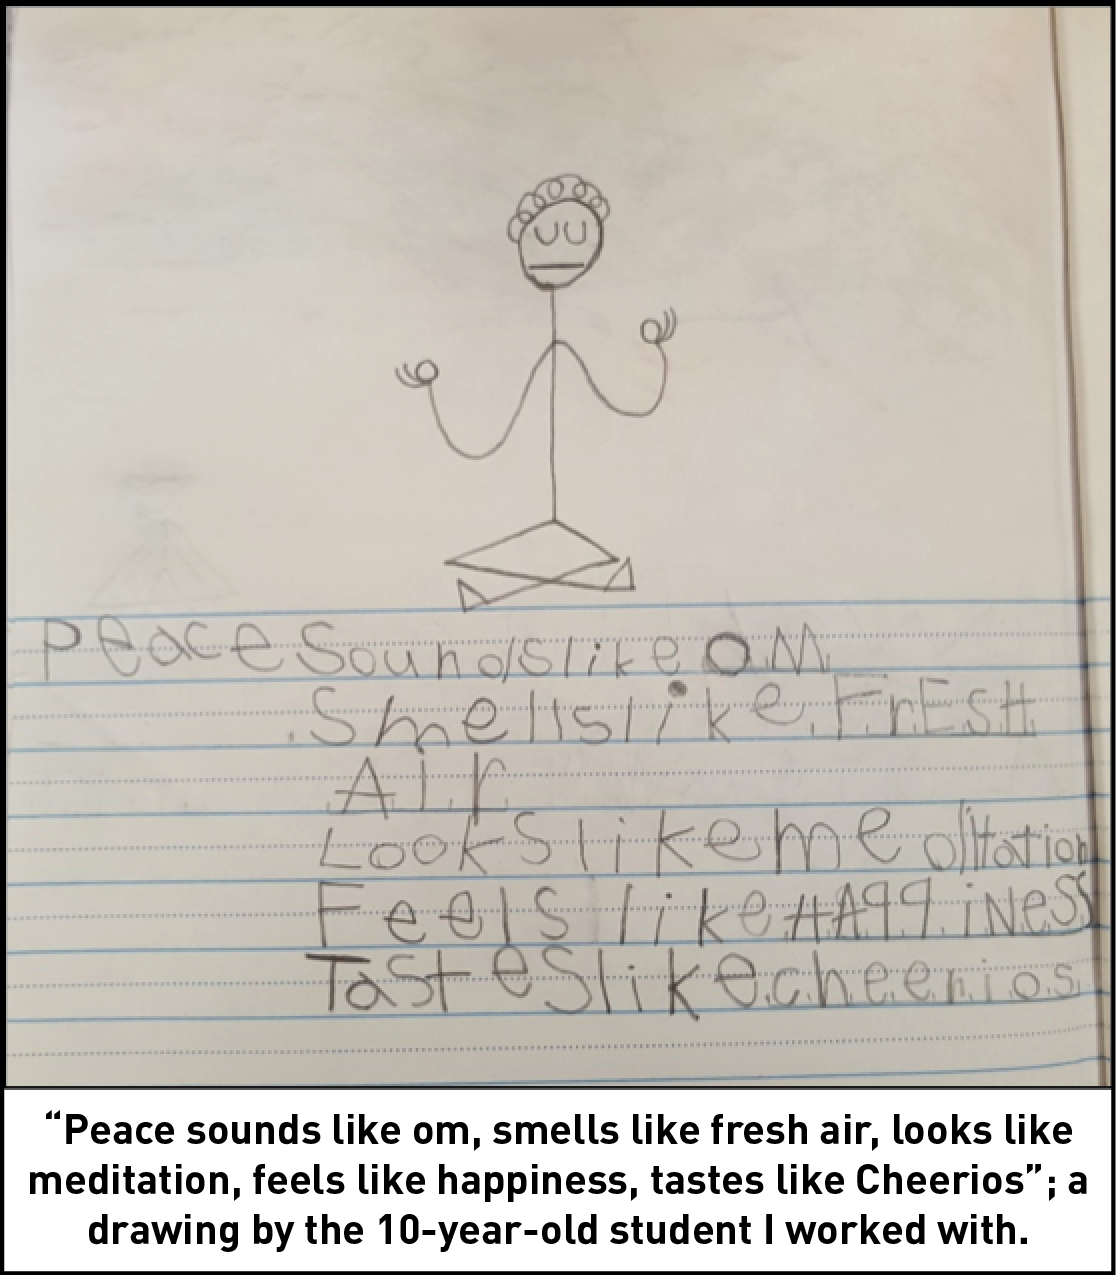 “Peace sounds like om, smells like fresh air, looks like meditation, feels like happiness, tastes like Cheerios”; a drawing by the 10-year-old student I worked with